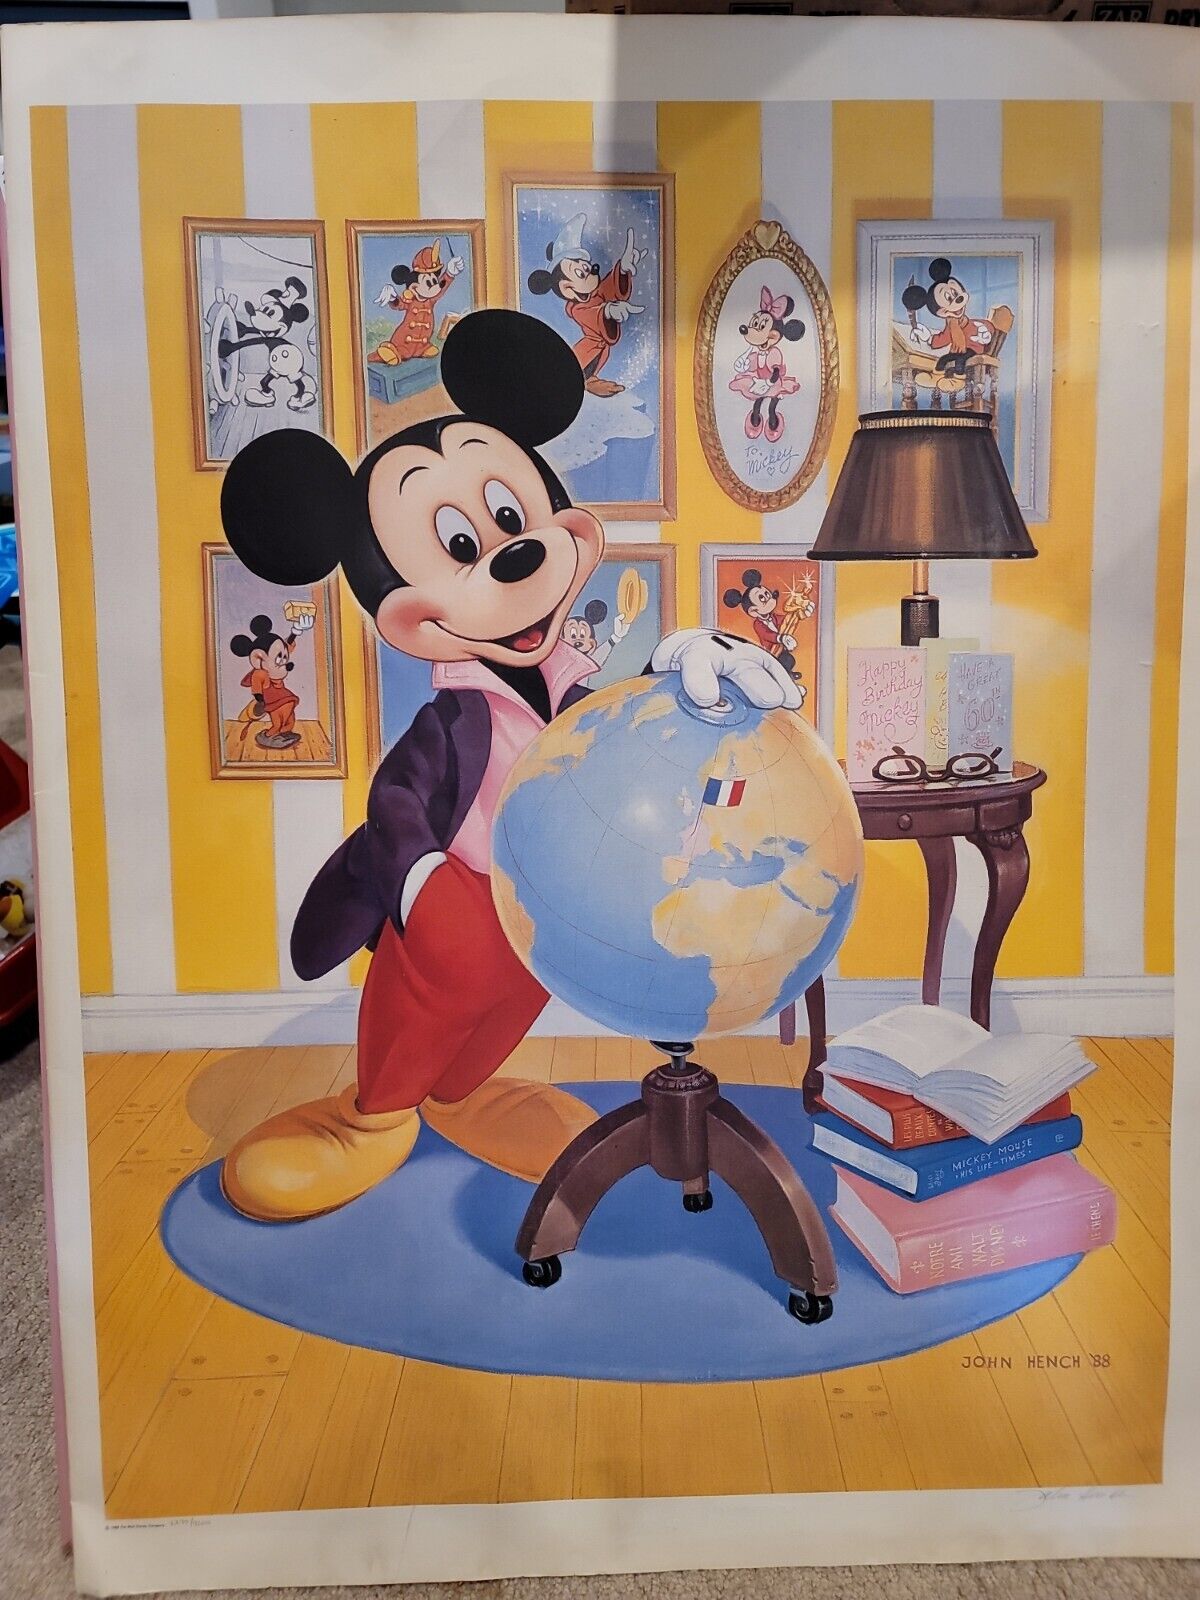 VTG 1988 Mickey Mouse 60th Anniversary Portrait Poster Signed John Hench 24x31